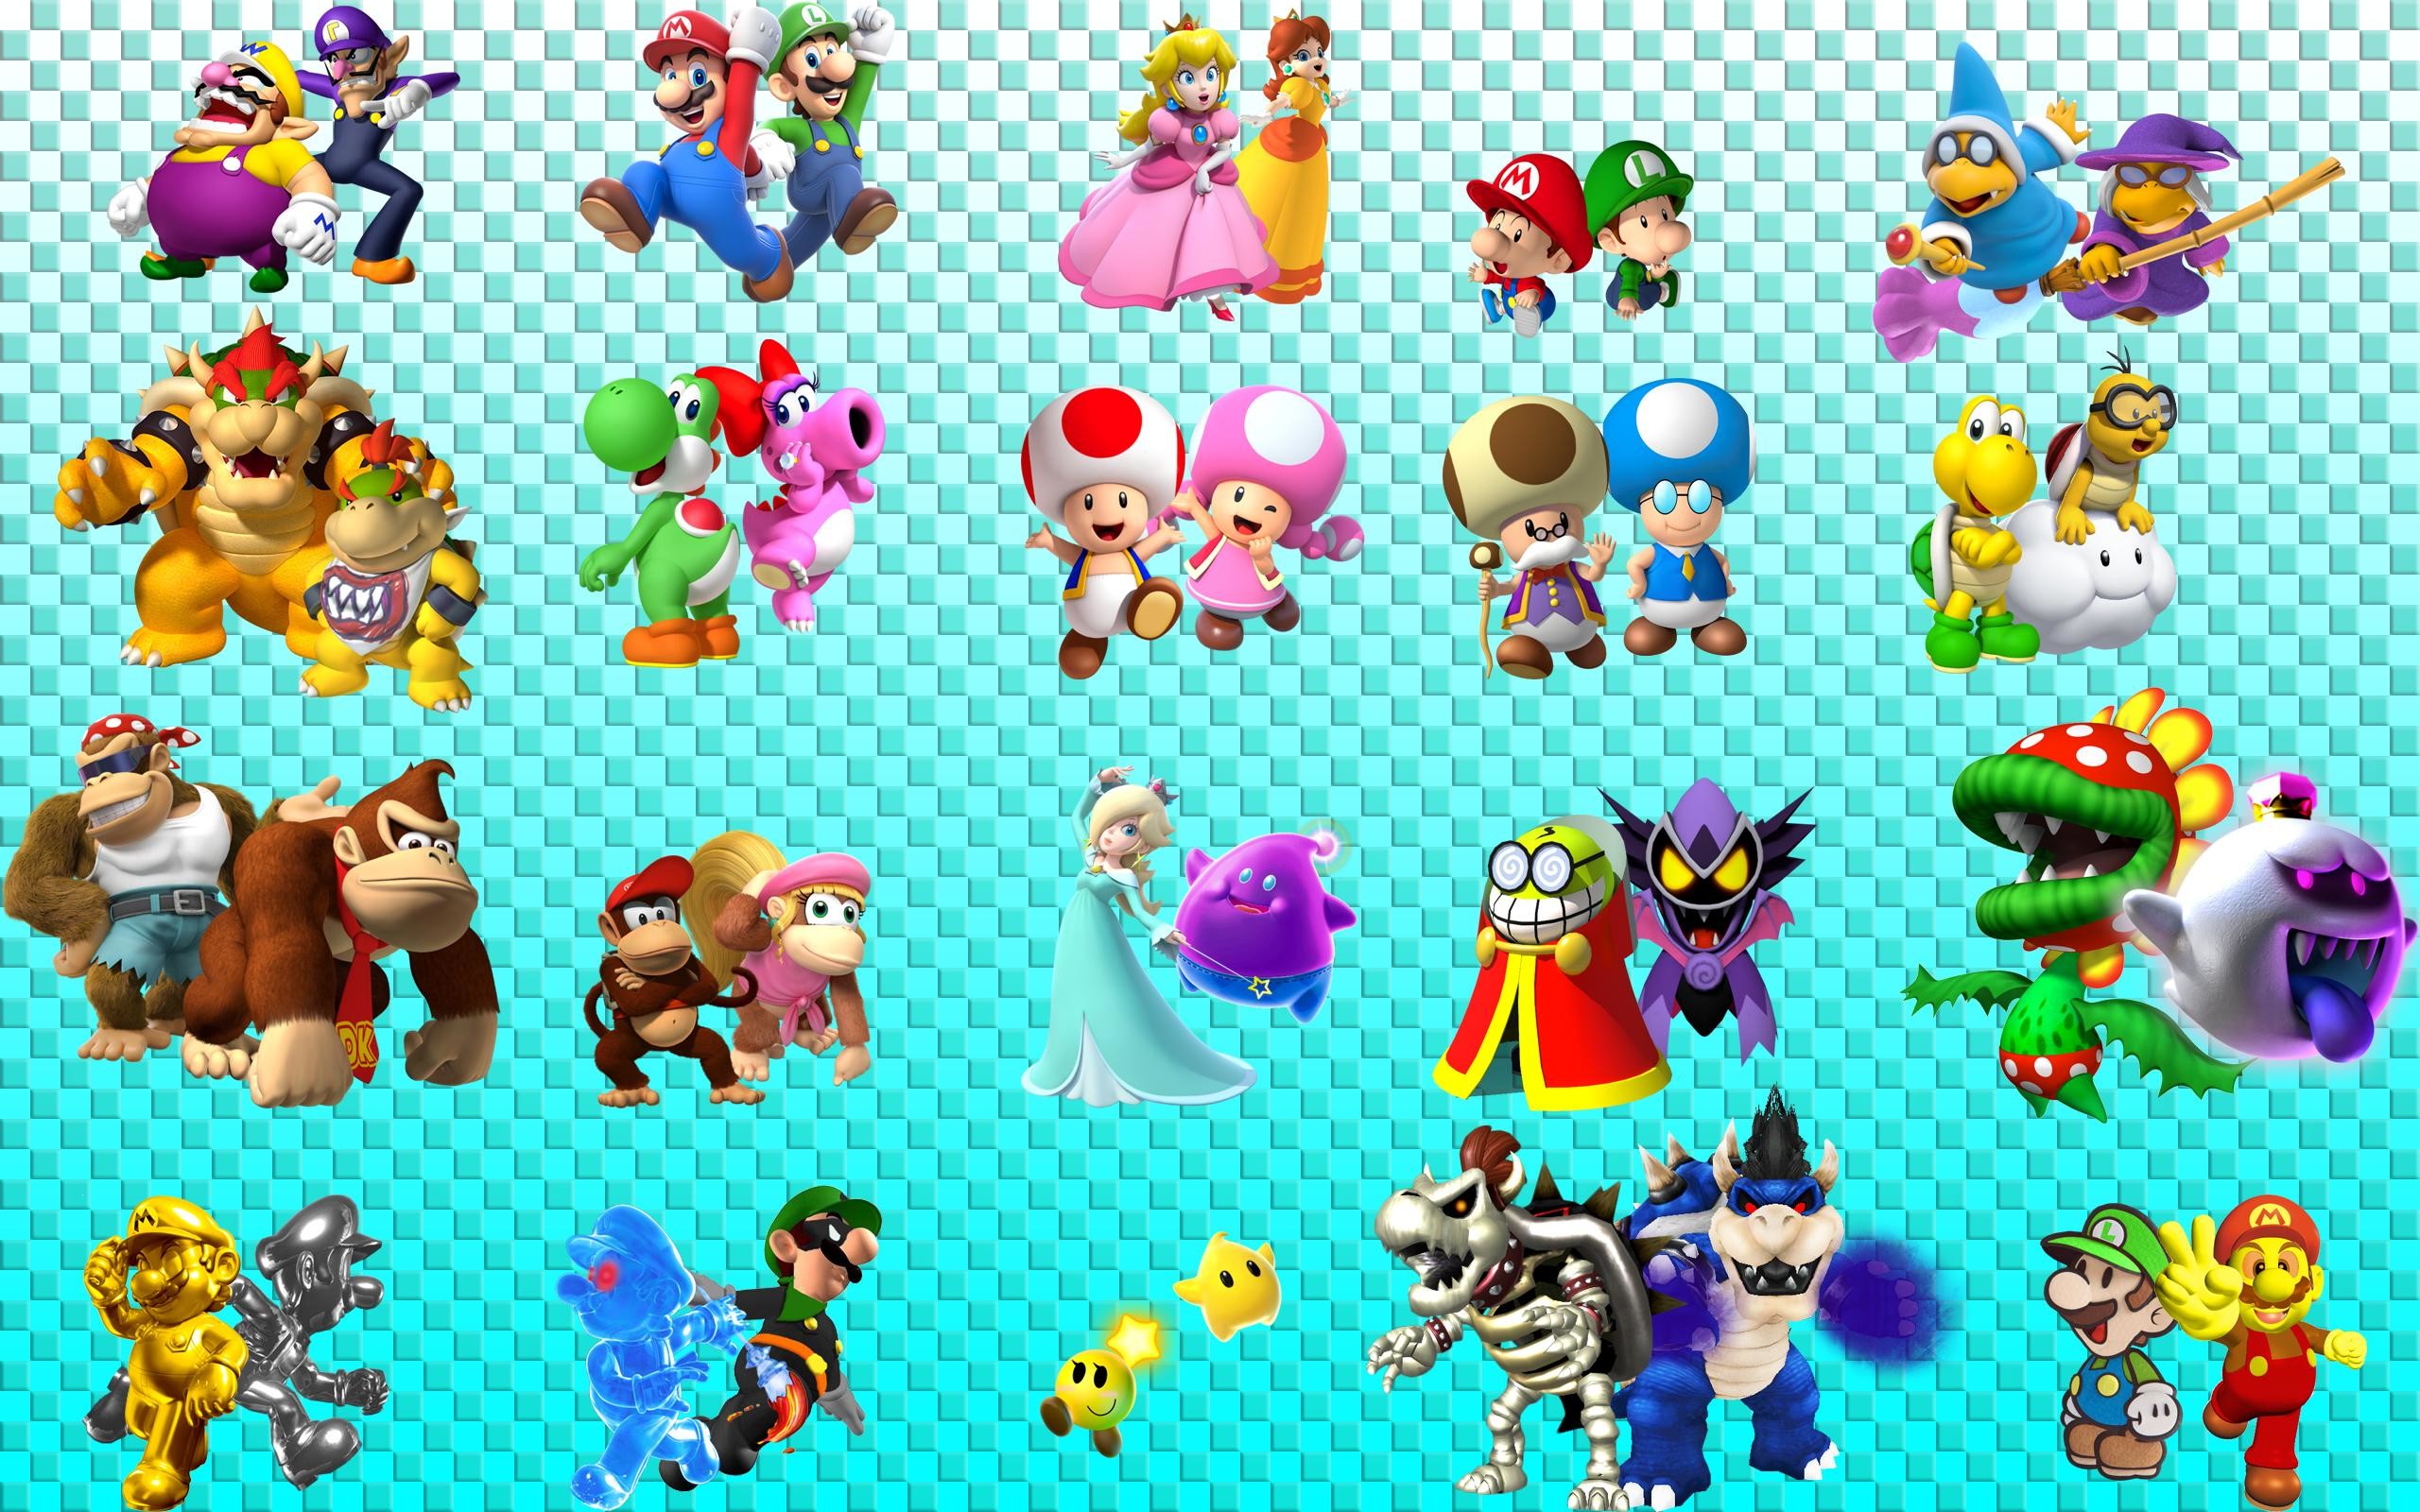 2560x1600 Post your next console Mario Kart roster! - Mario Kart 8 Message Board for  Wii U - Page 10 - GameFAQs